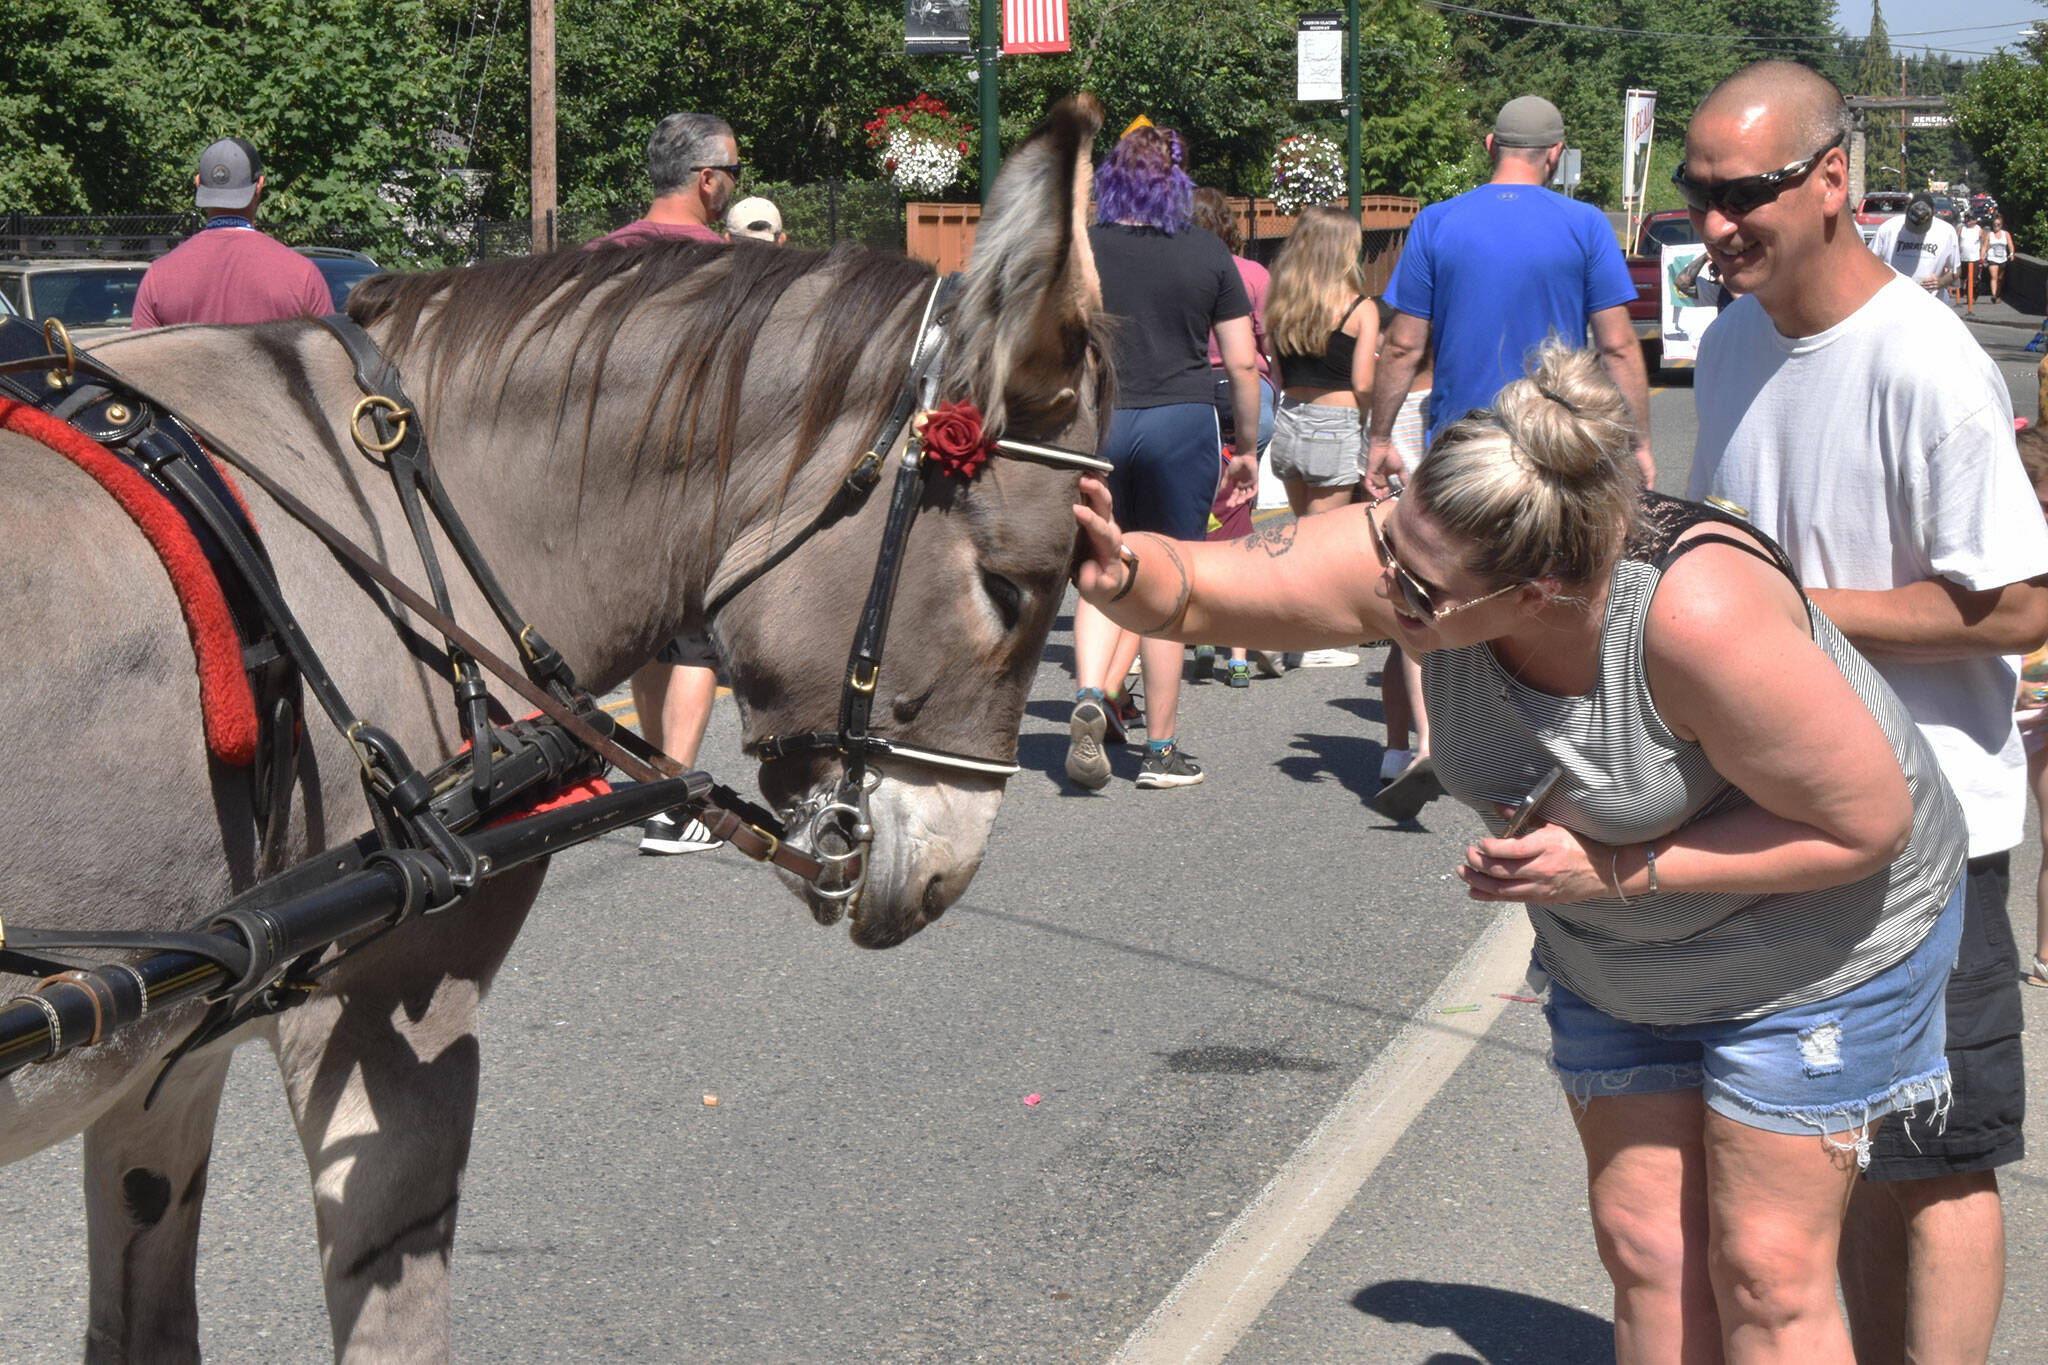 The parade through Wilkeson featured everything from floats to animals. Photo by Alex Bruell